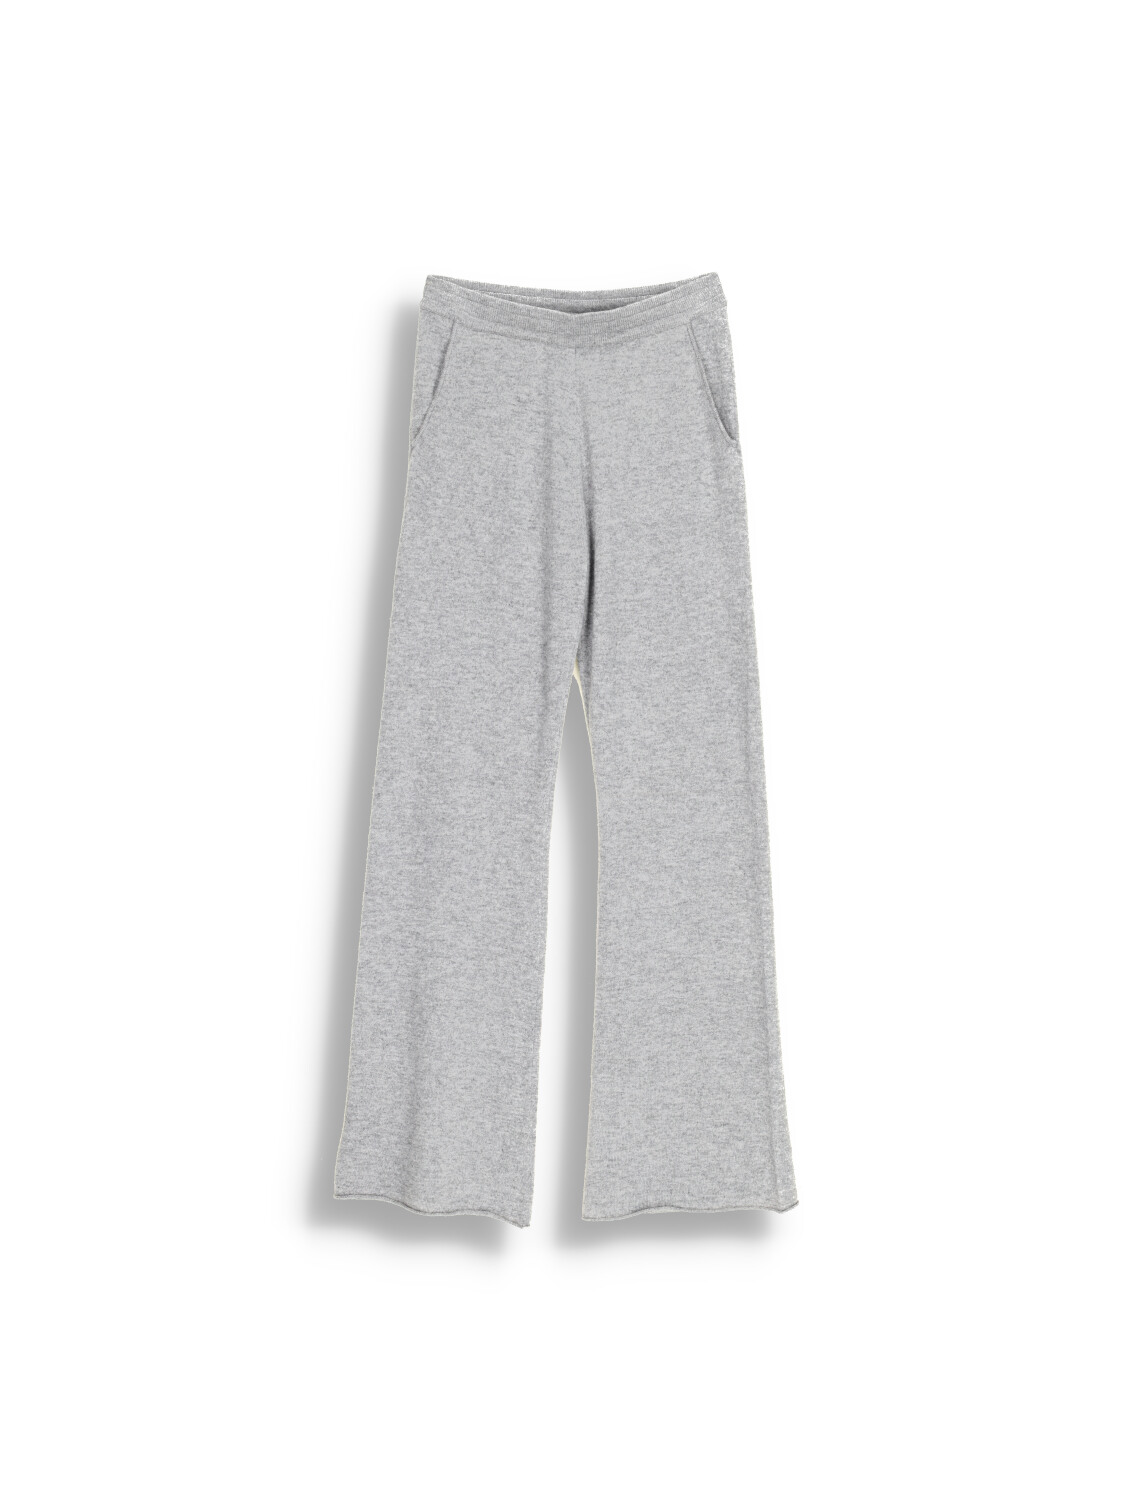 Fine knit flared wool and cashmere pants